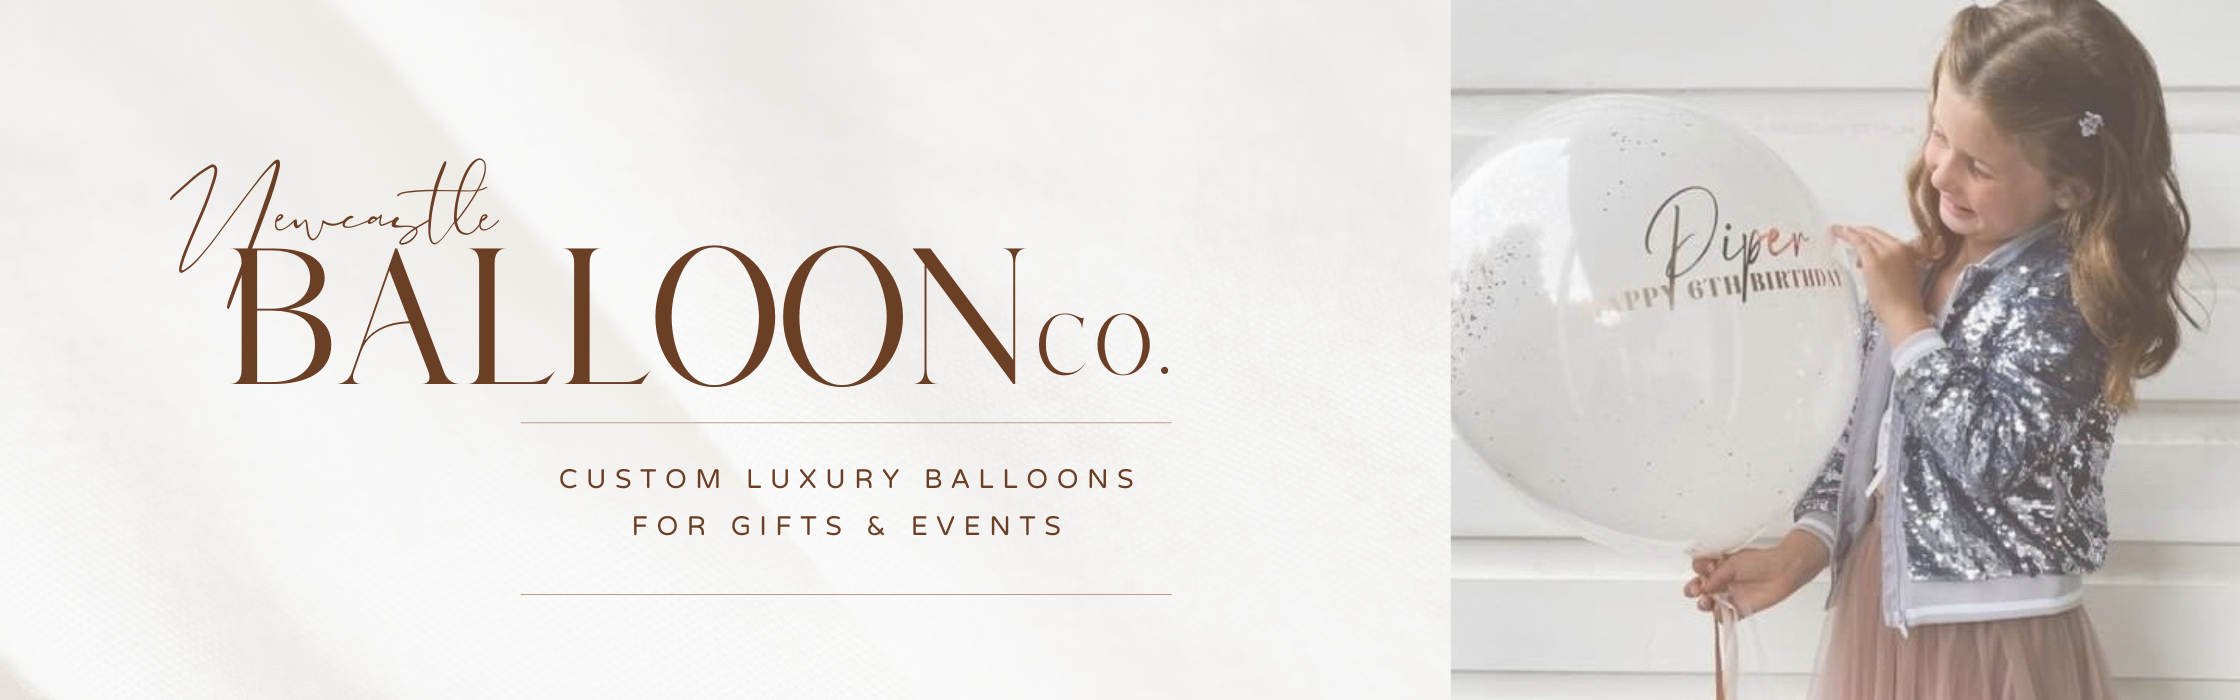 Newcastle Balloon Co. Custom Luxury Balloons for gifts and events.